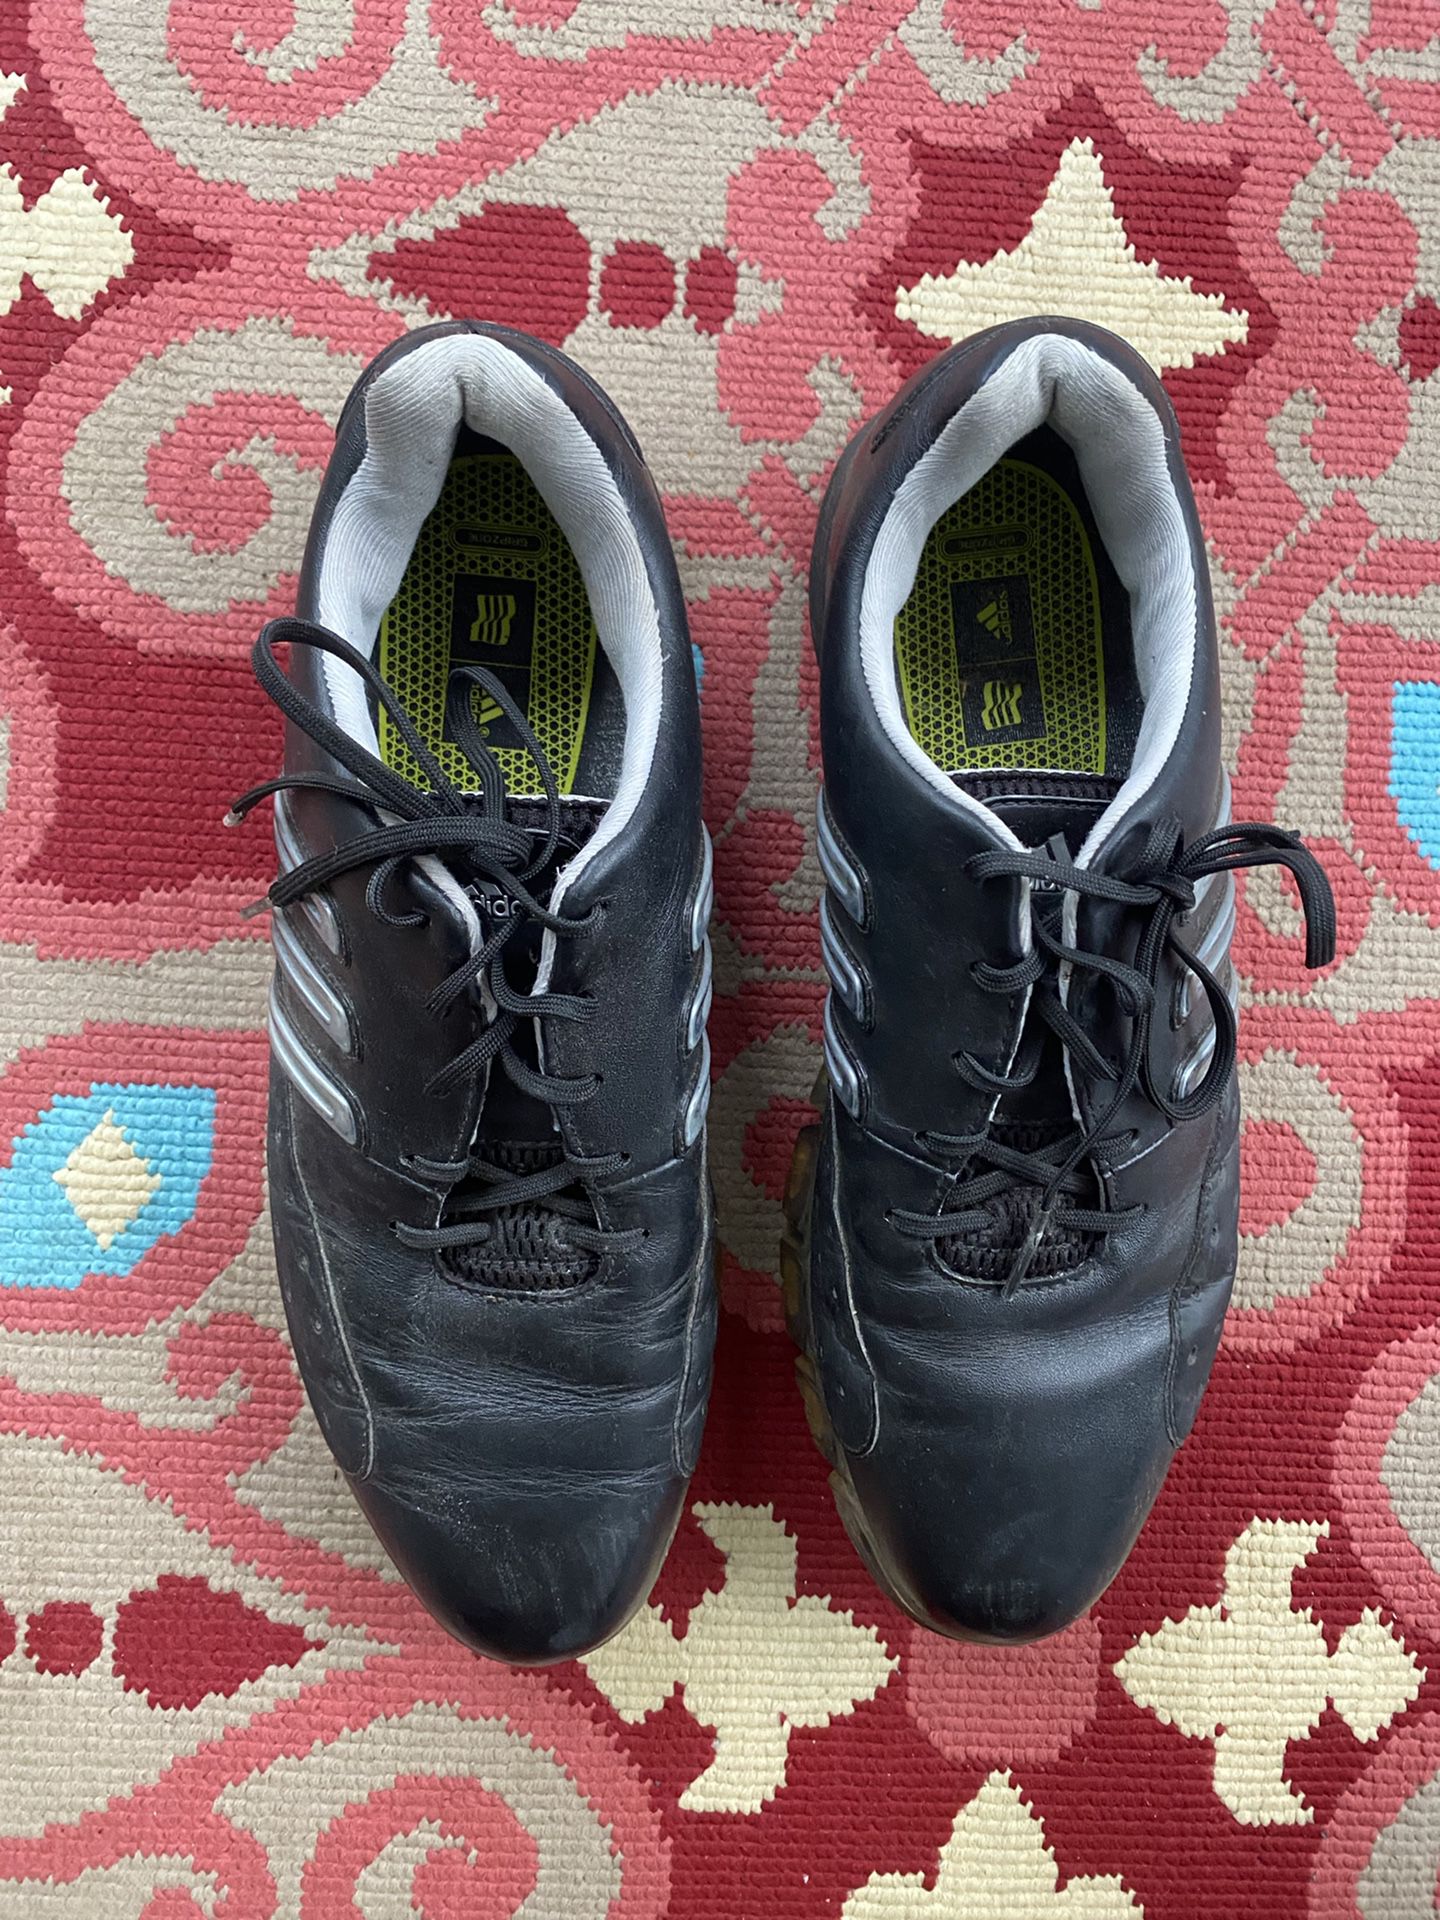 Golf Shoes for NY - OfferUp